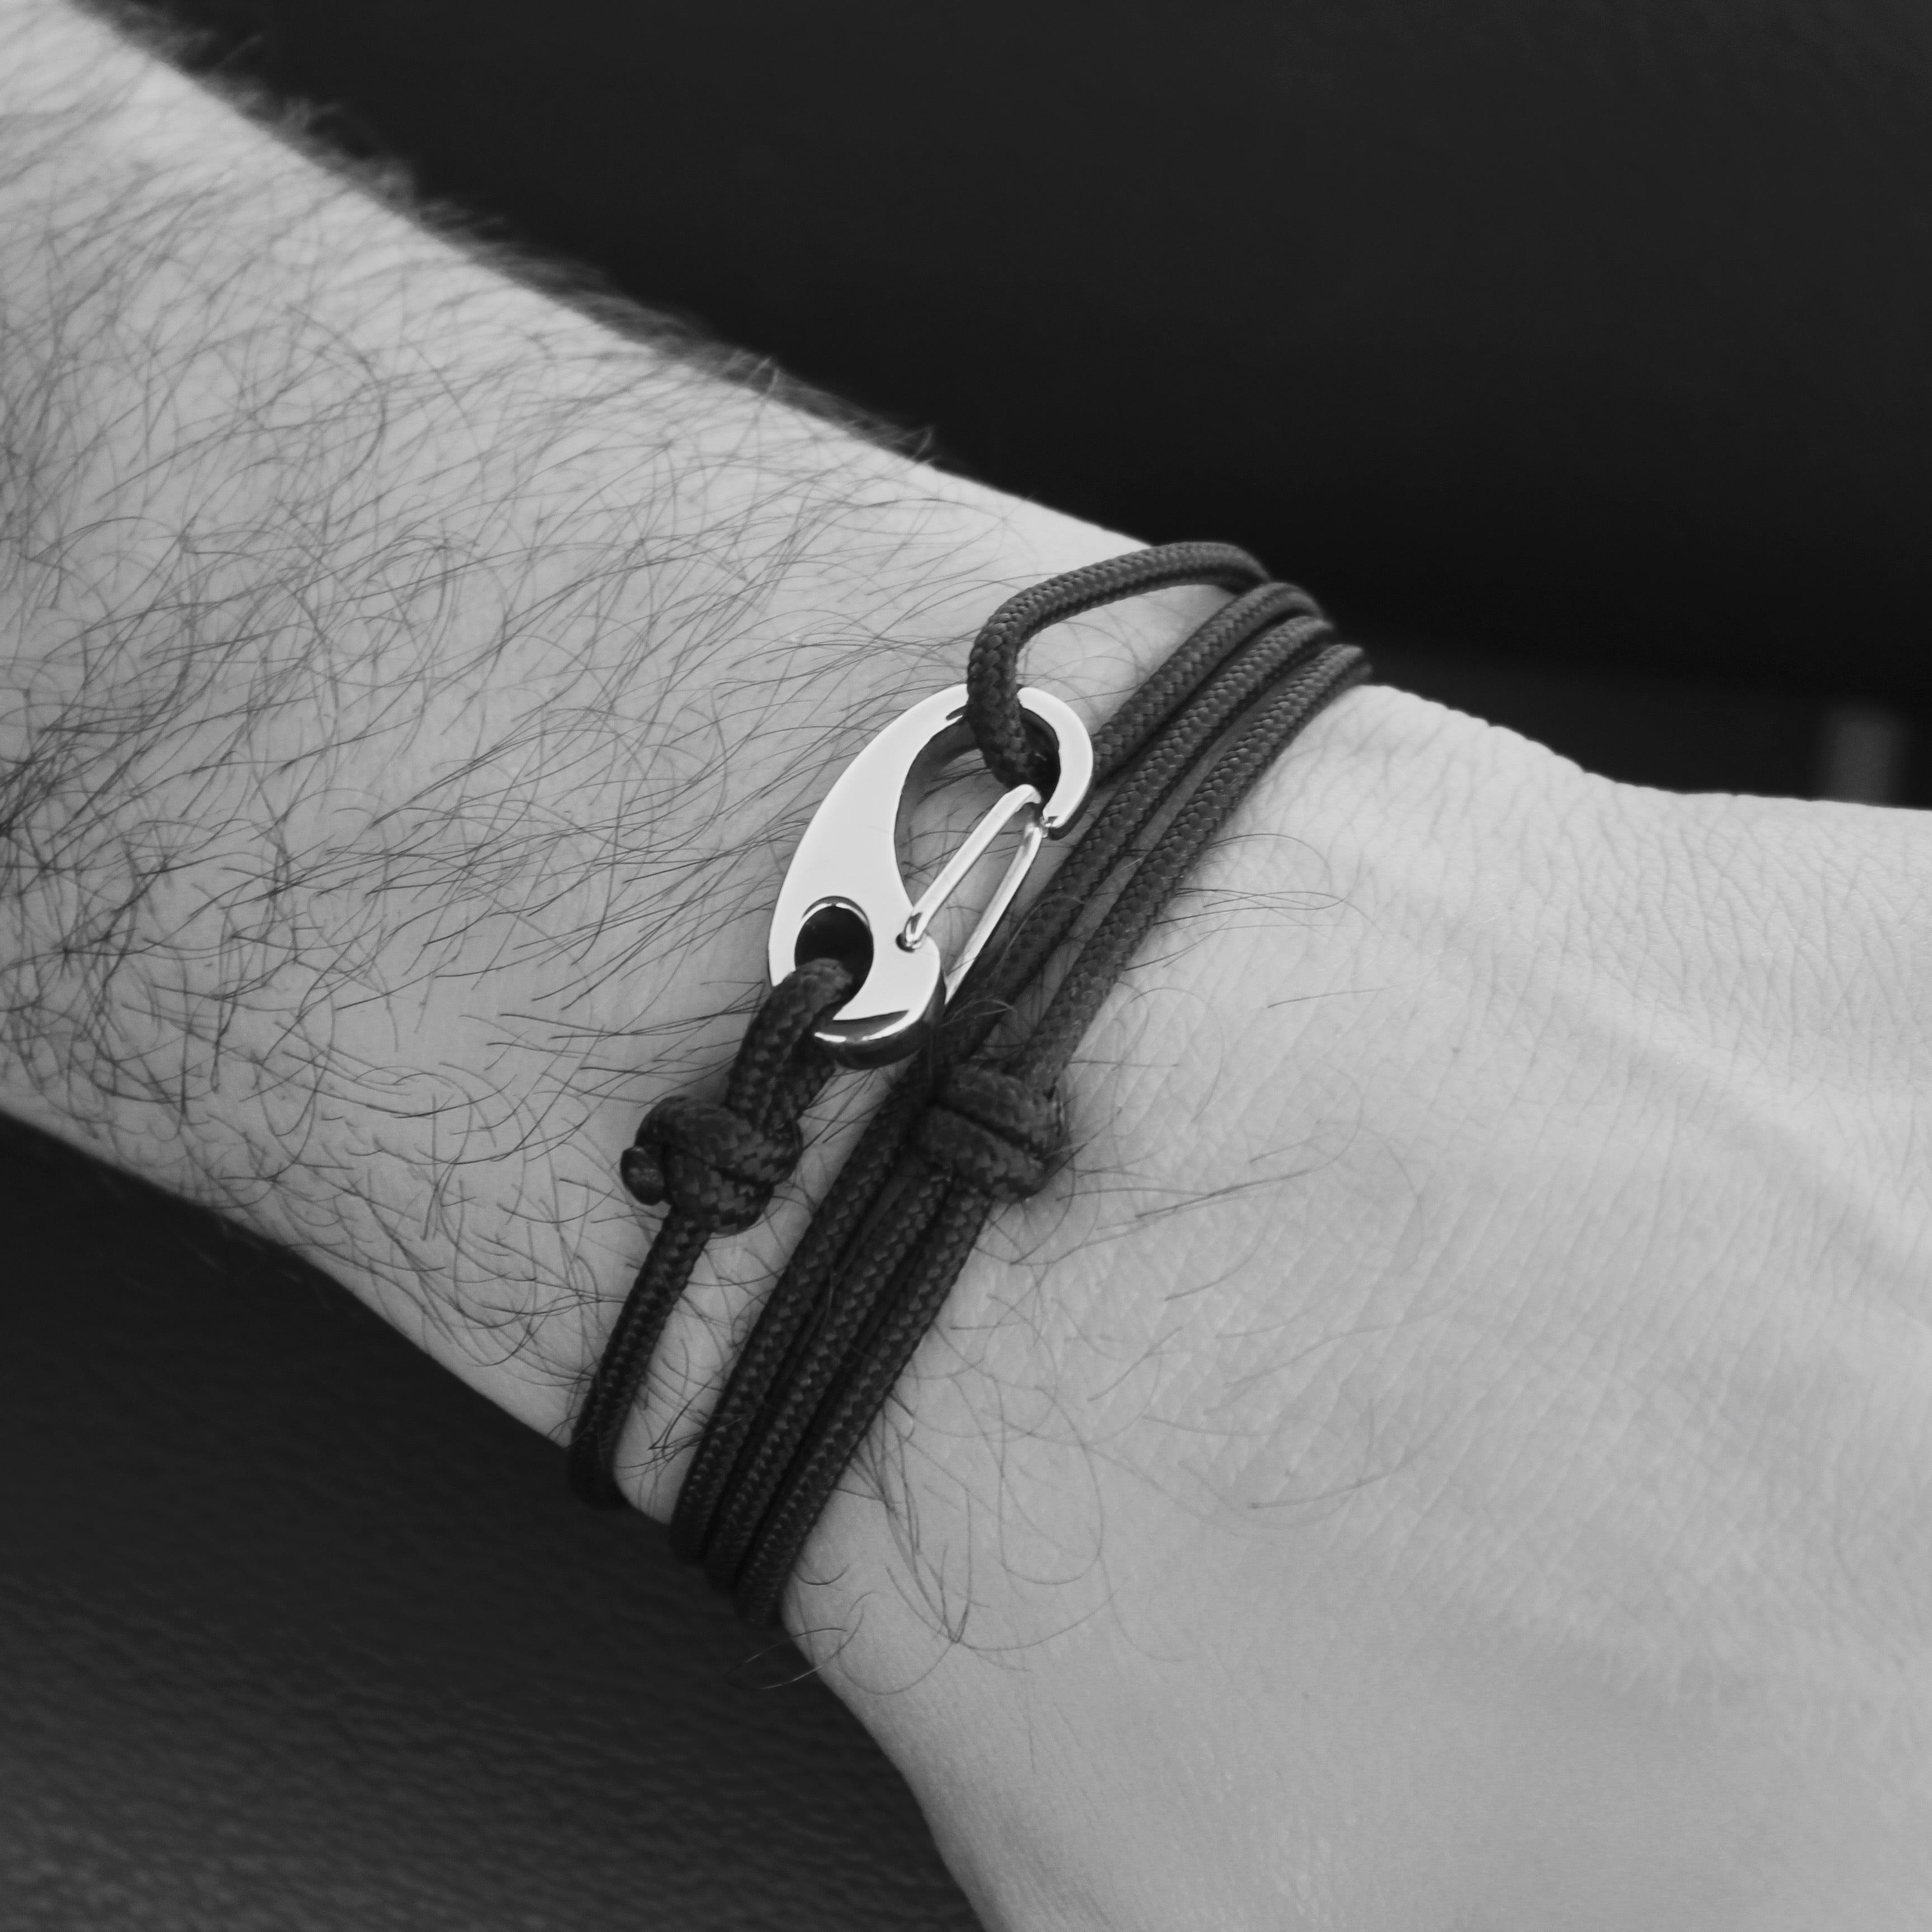 Mens | Tactical Cord + Stainless Steel Bracelet in Black Reflective